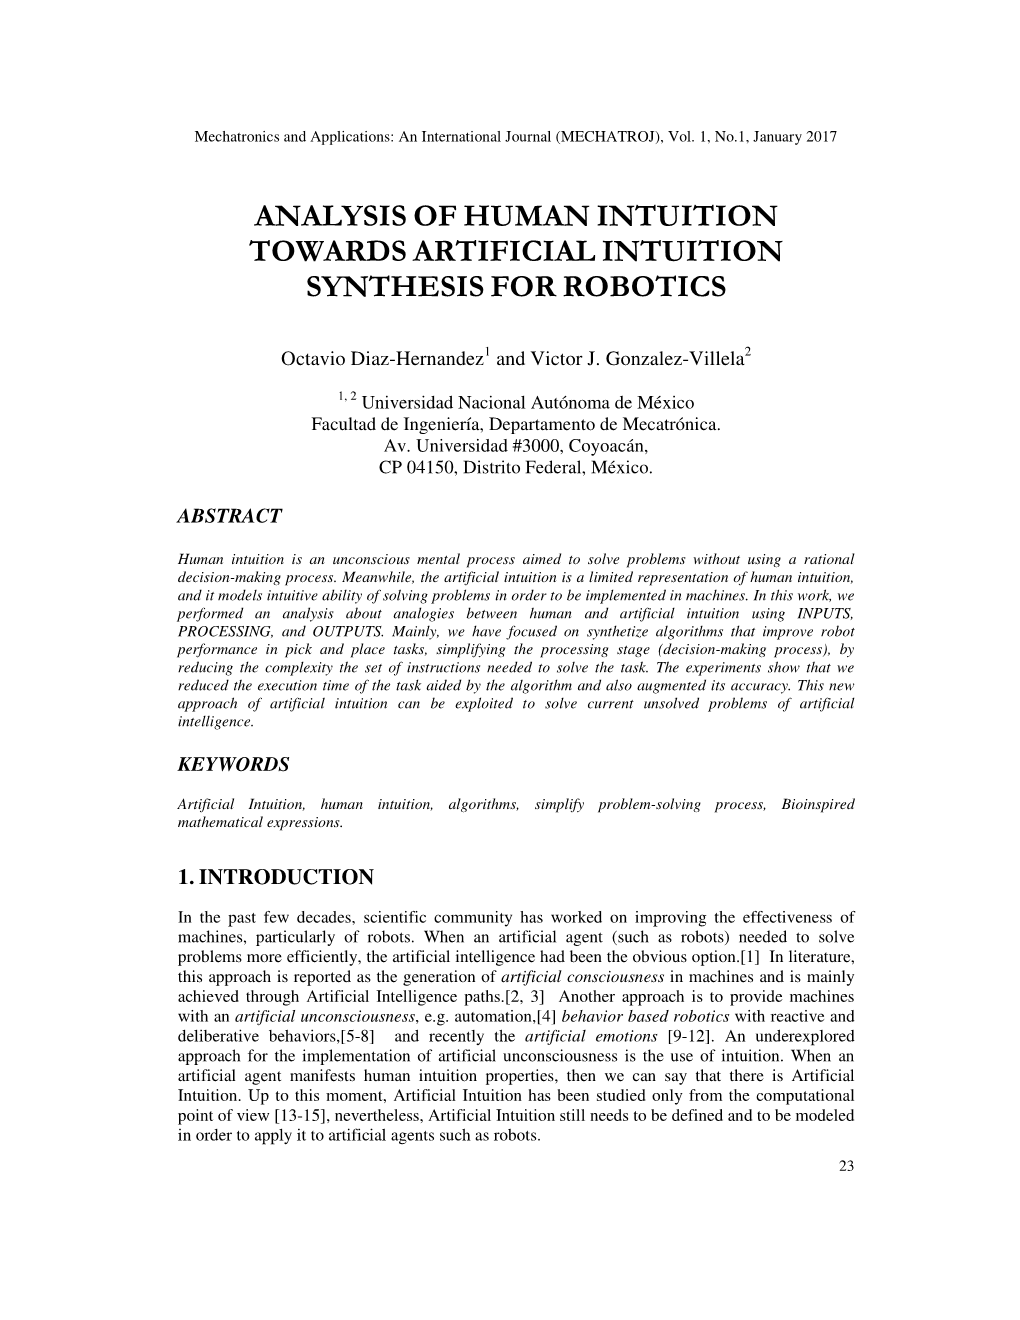 Analysis of Human Intuition Towards Artificial Intuition Synthesis for Robotics